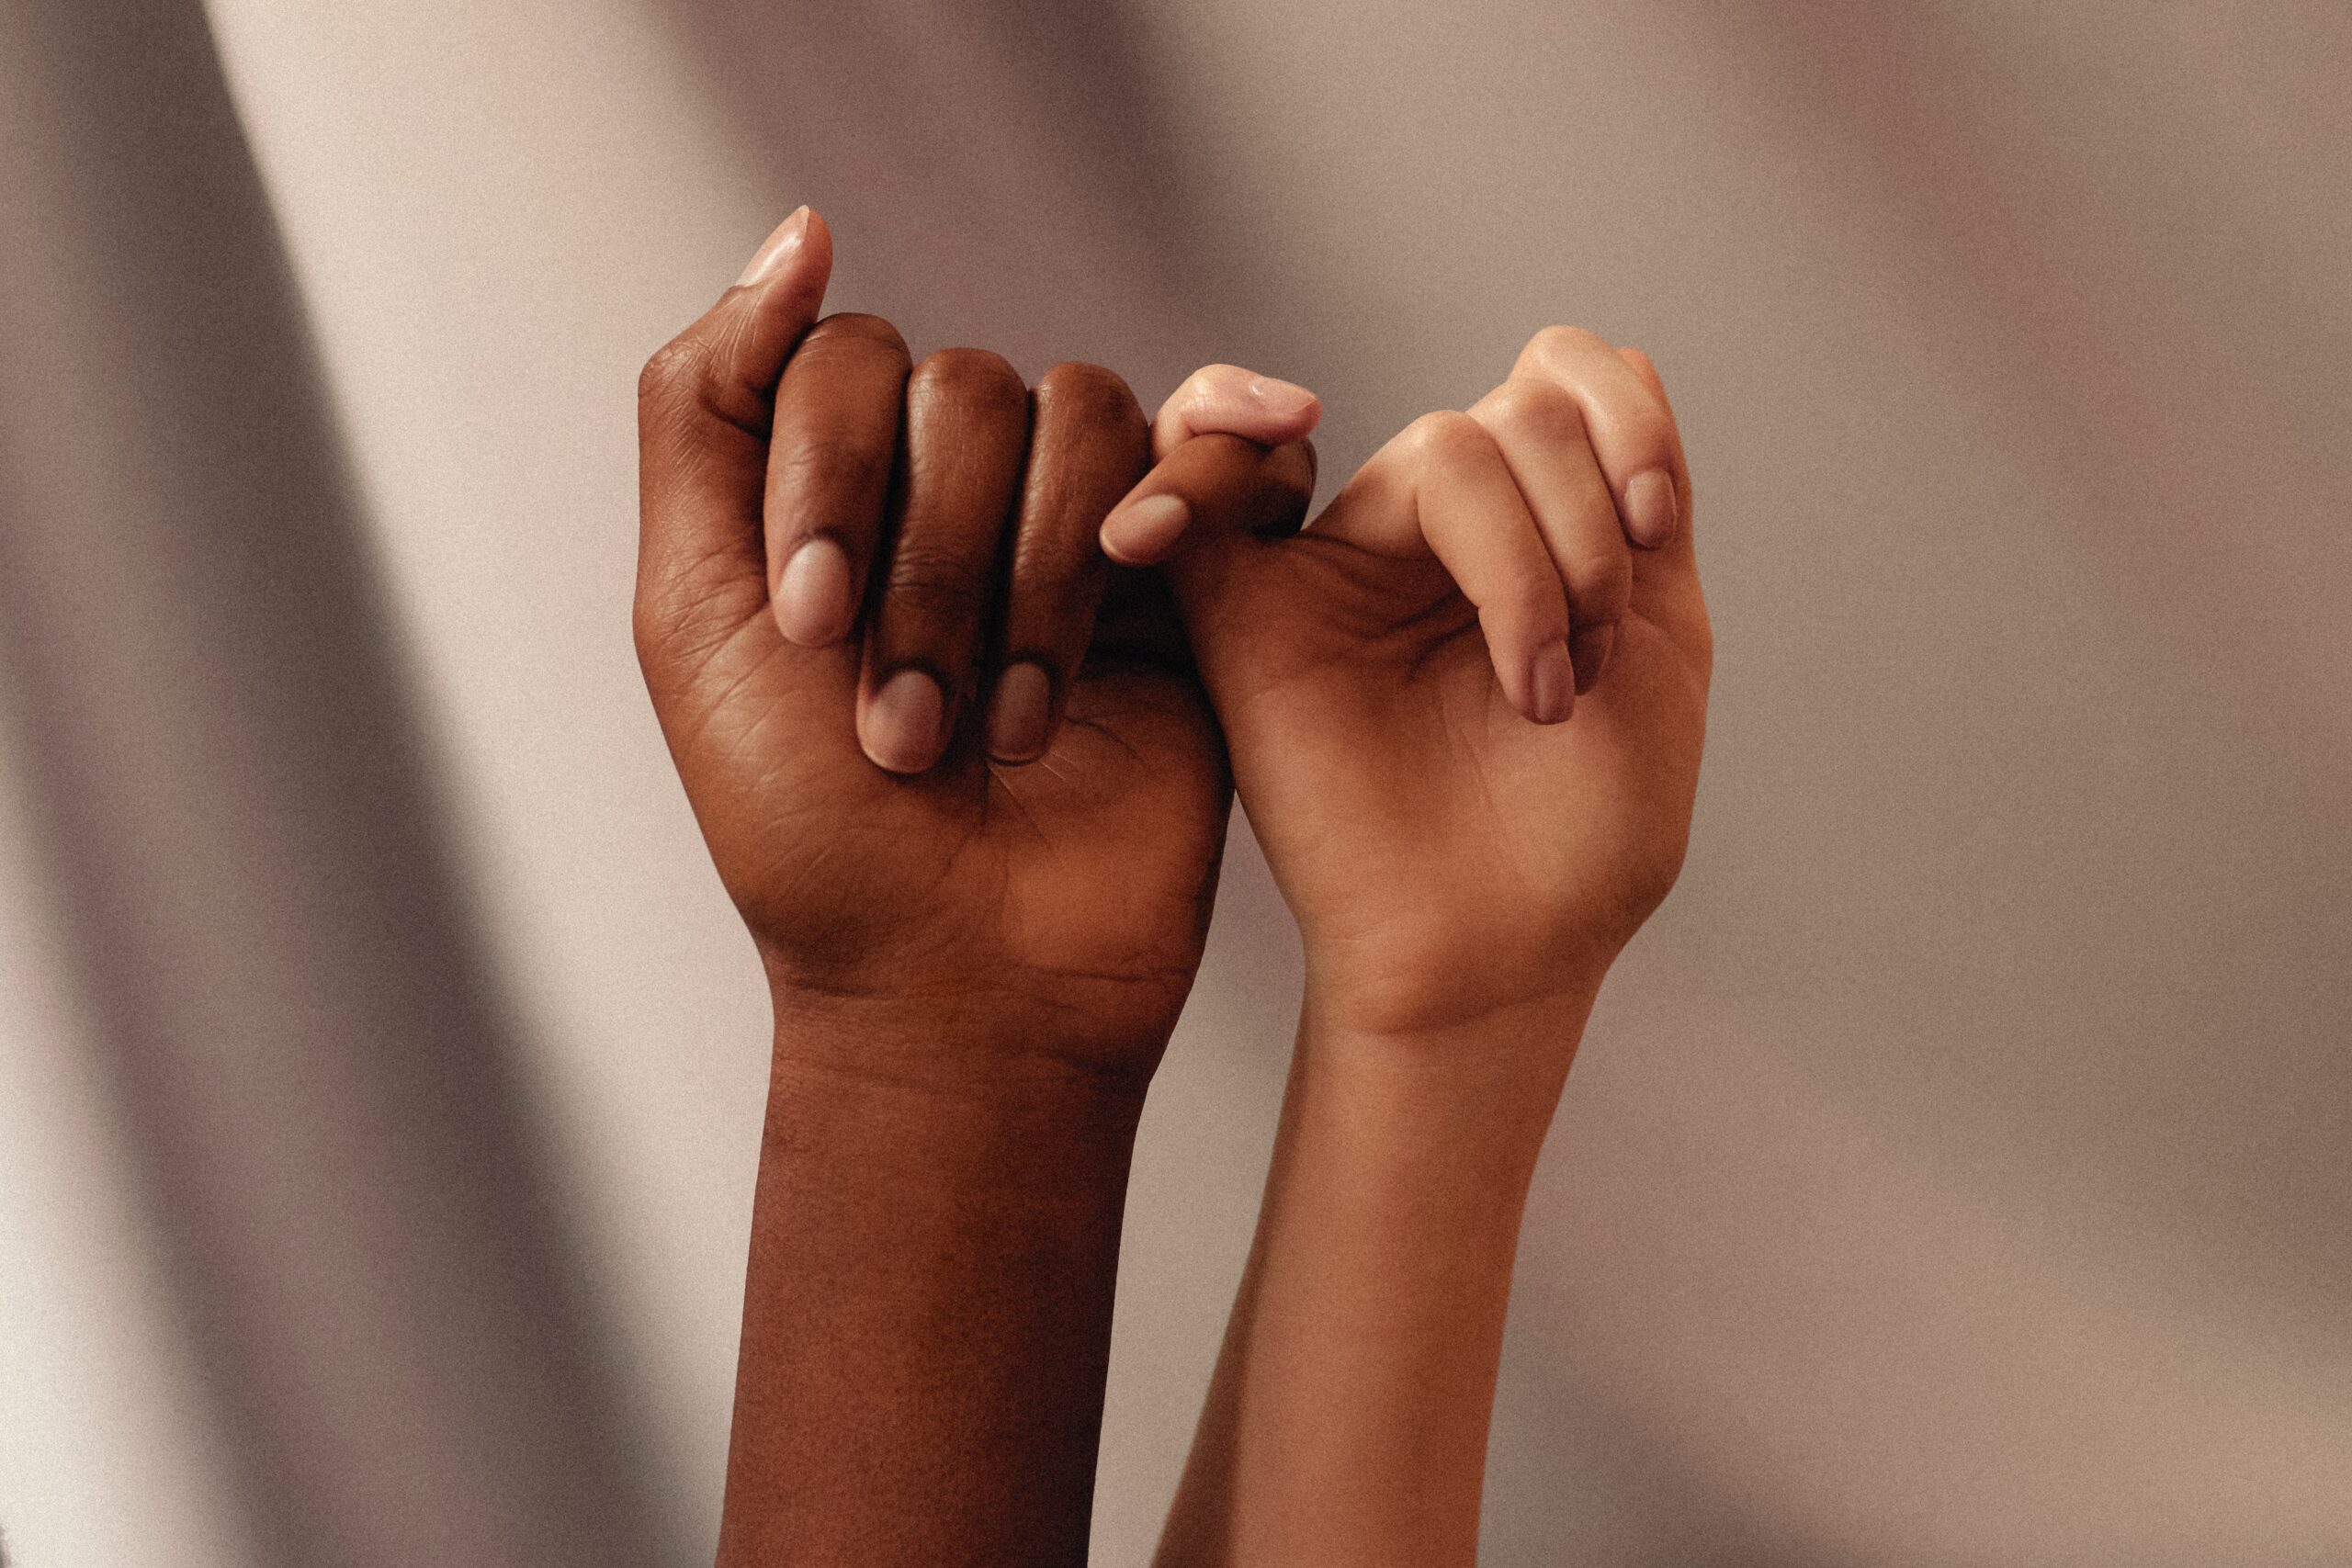 Two women's hands holding pinky fingers. One hand has dark skin and the other hand has lighter skin. Symbolising women working together to break the bias at work.